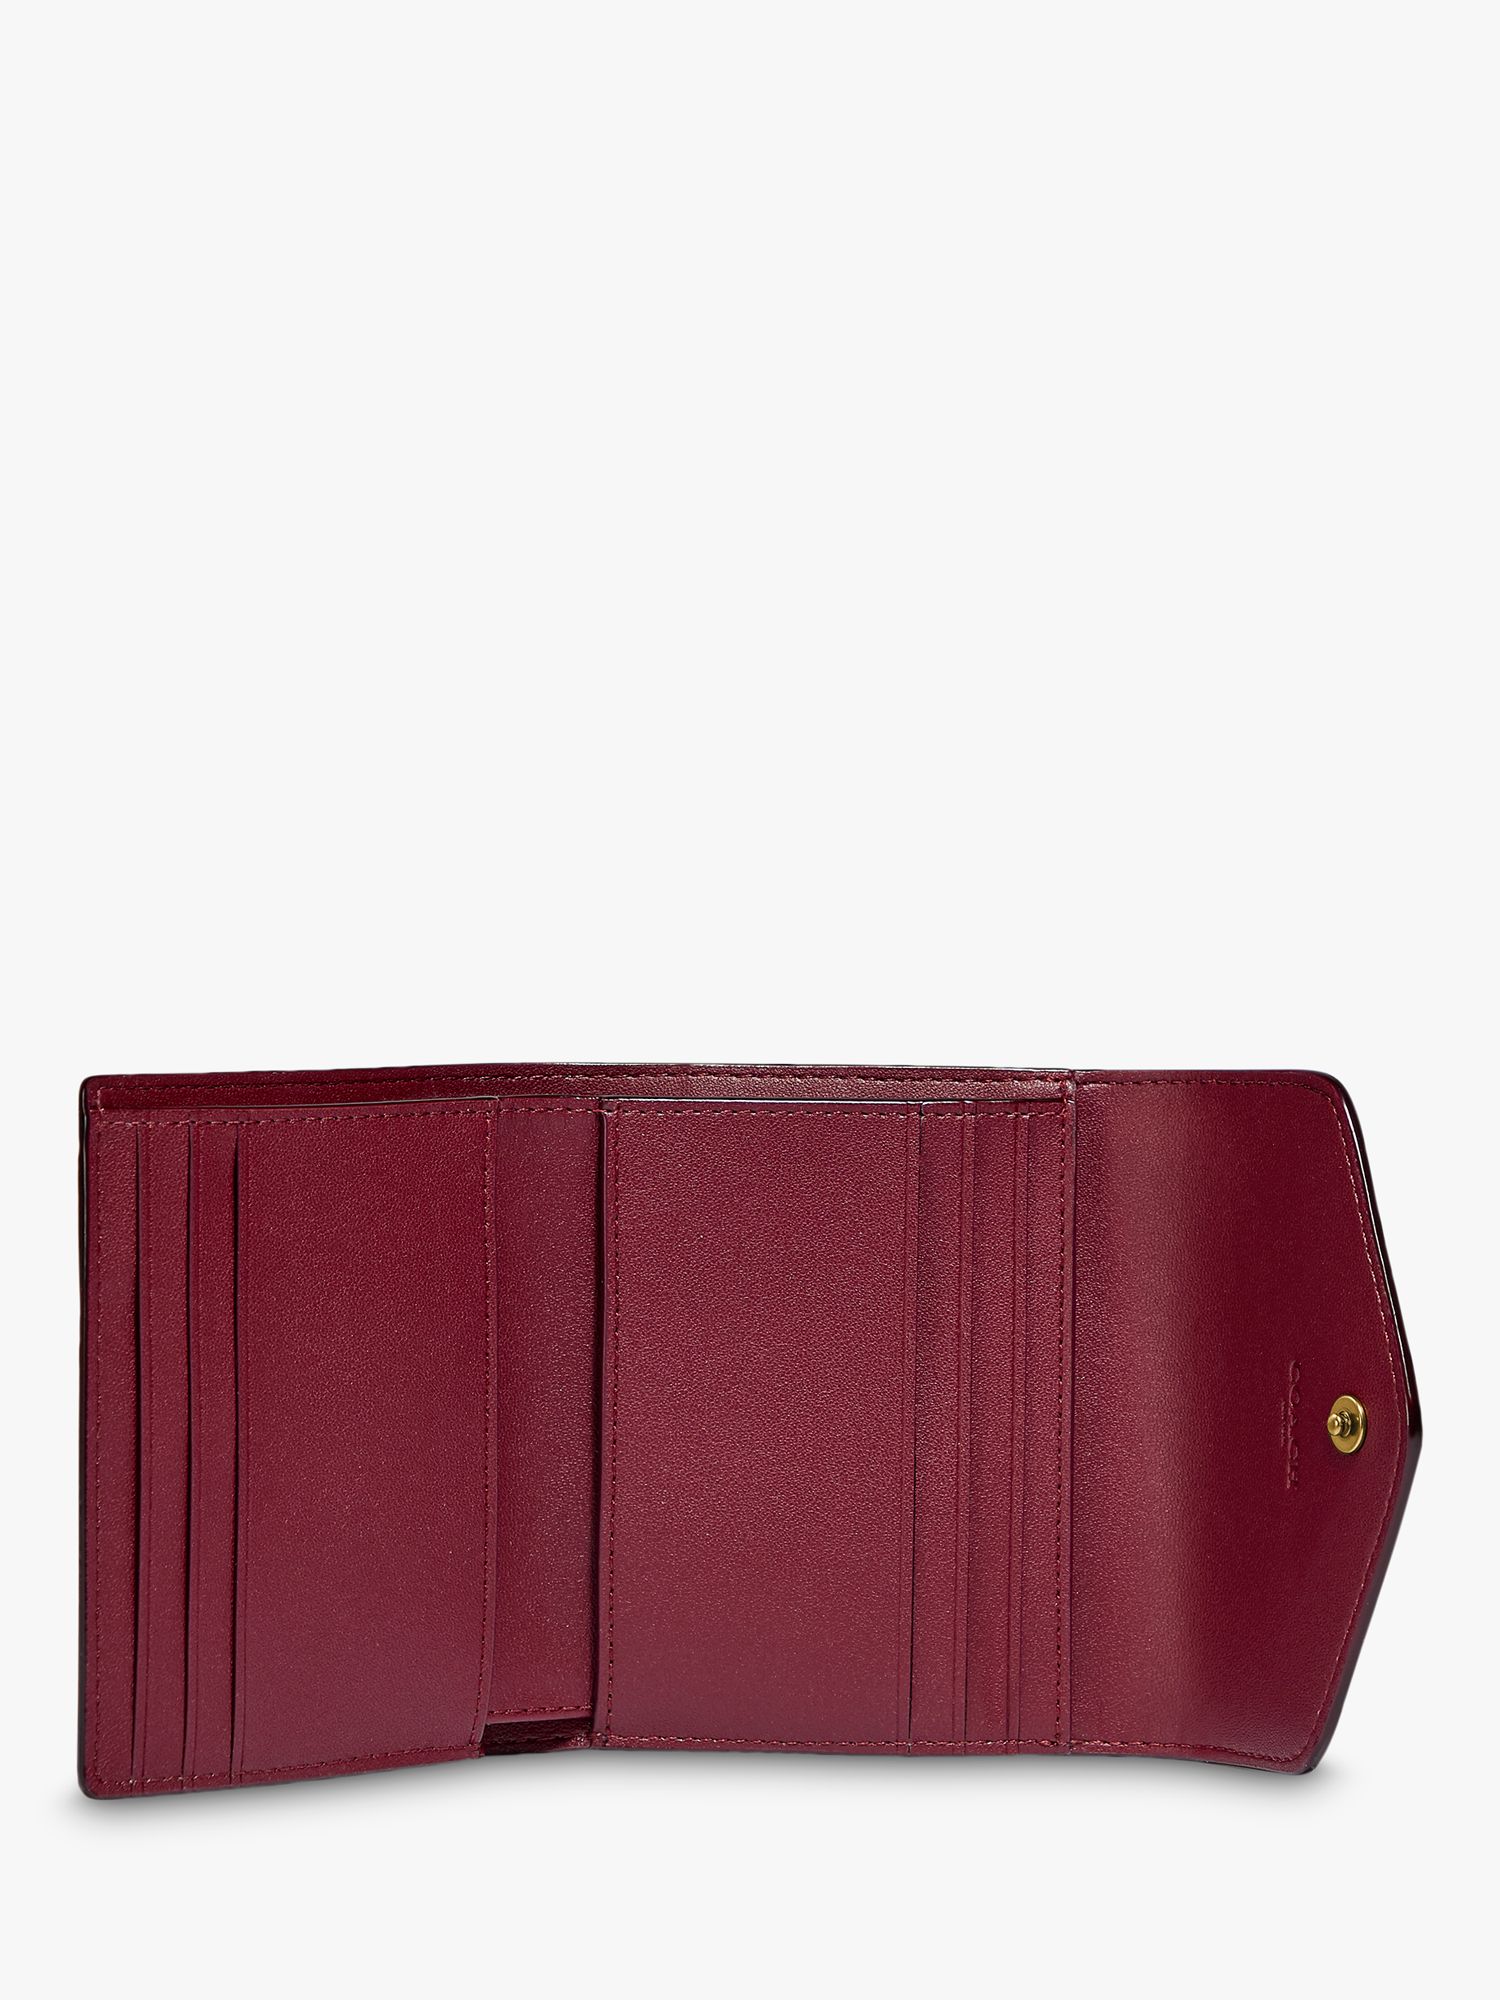 Buy Coach Small Signature Wallet, Tan/Rust Online at johnlewis.com